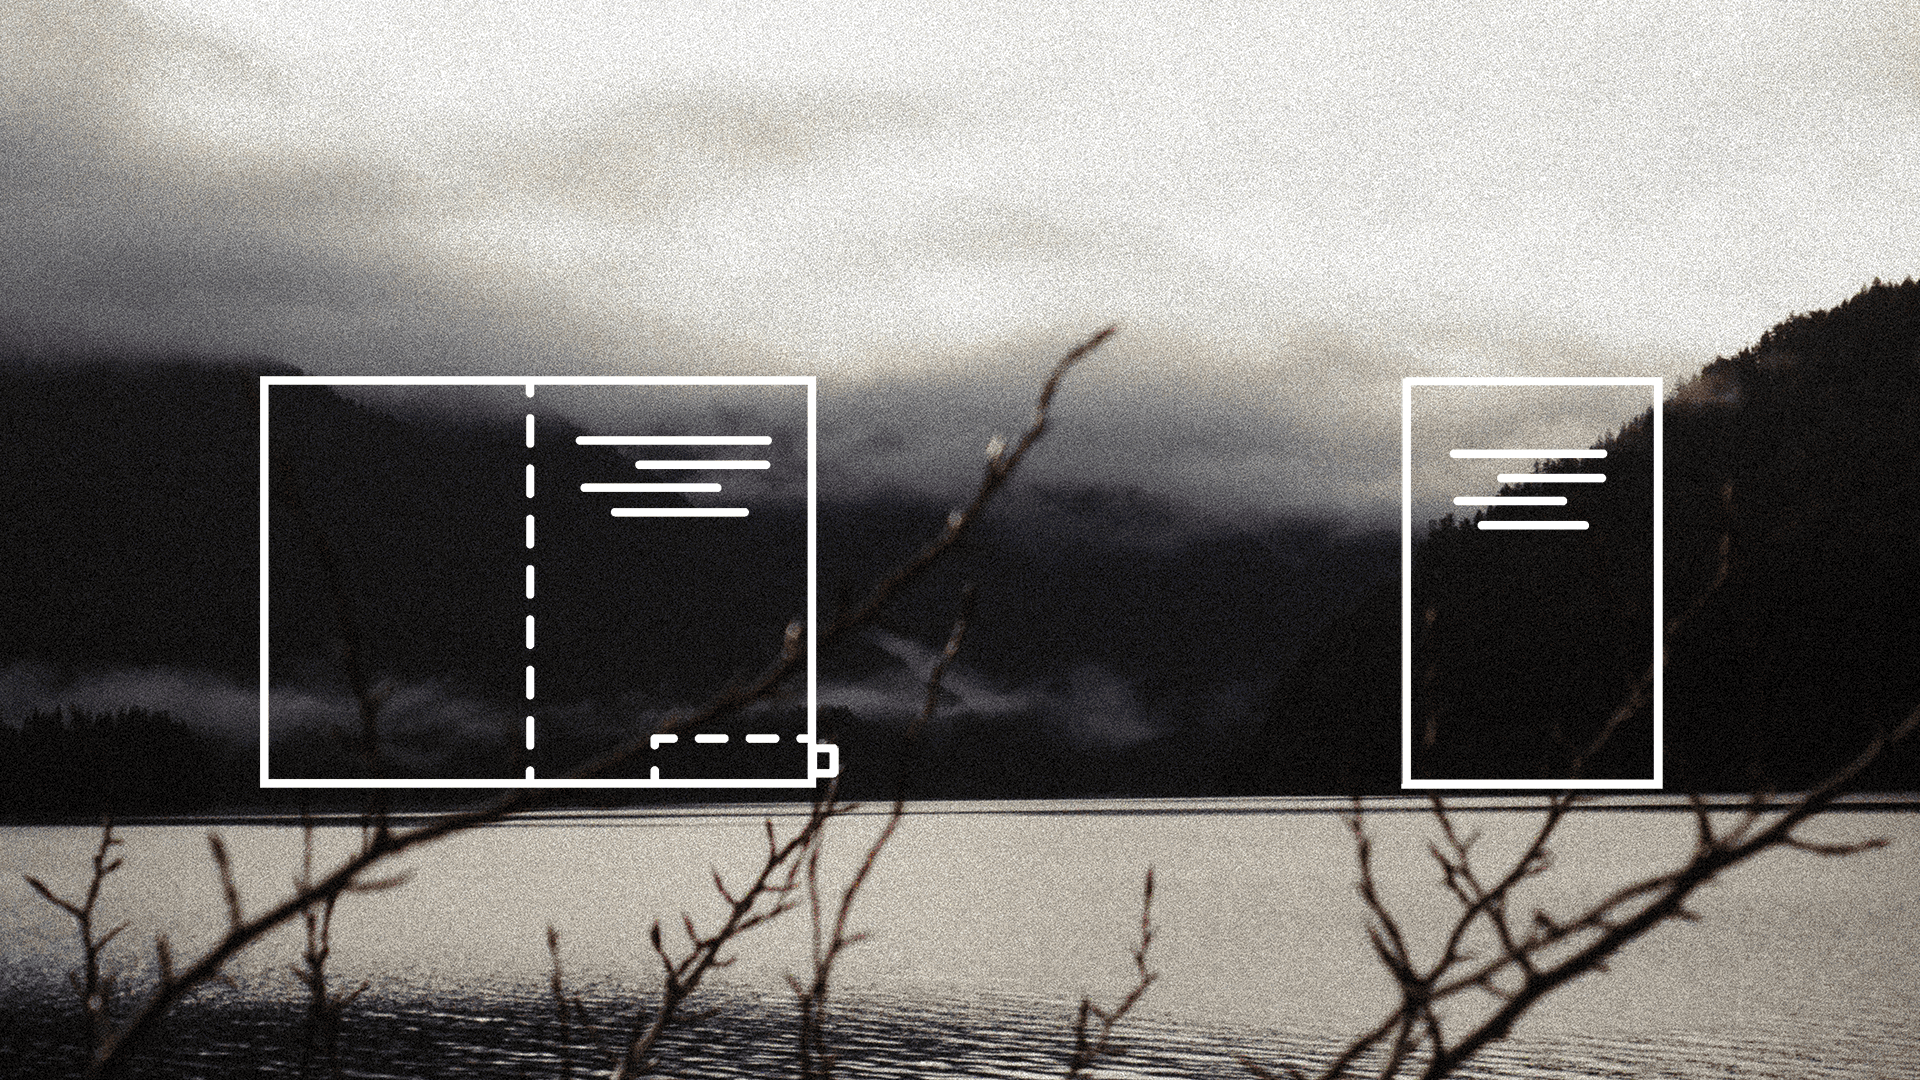 Animated book sketches on a grainy image of a lake and clouds.